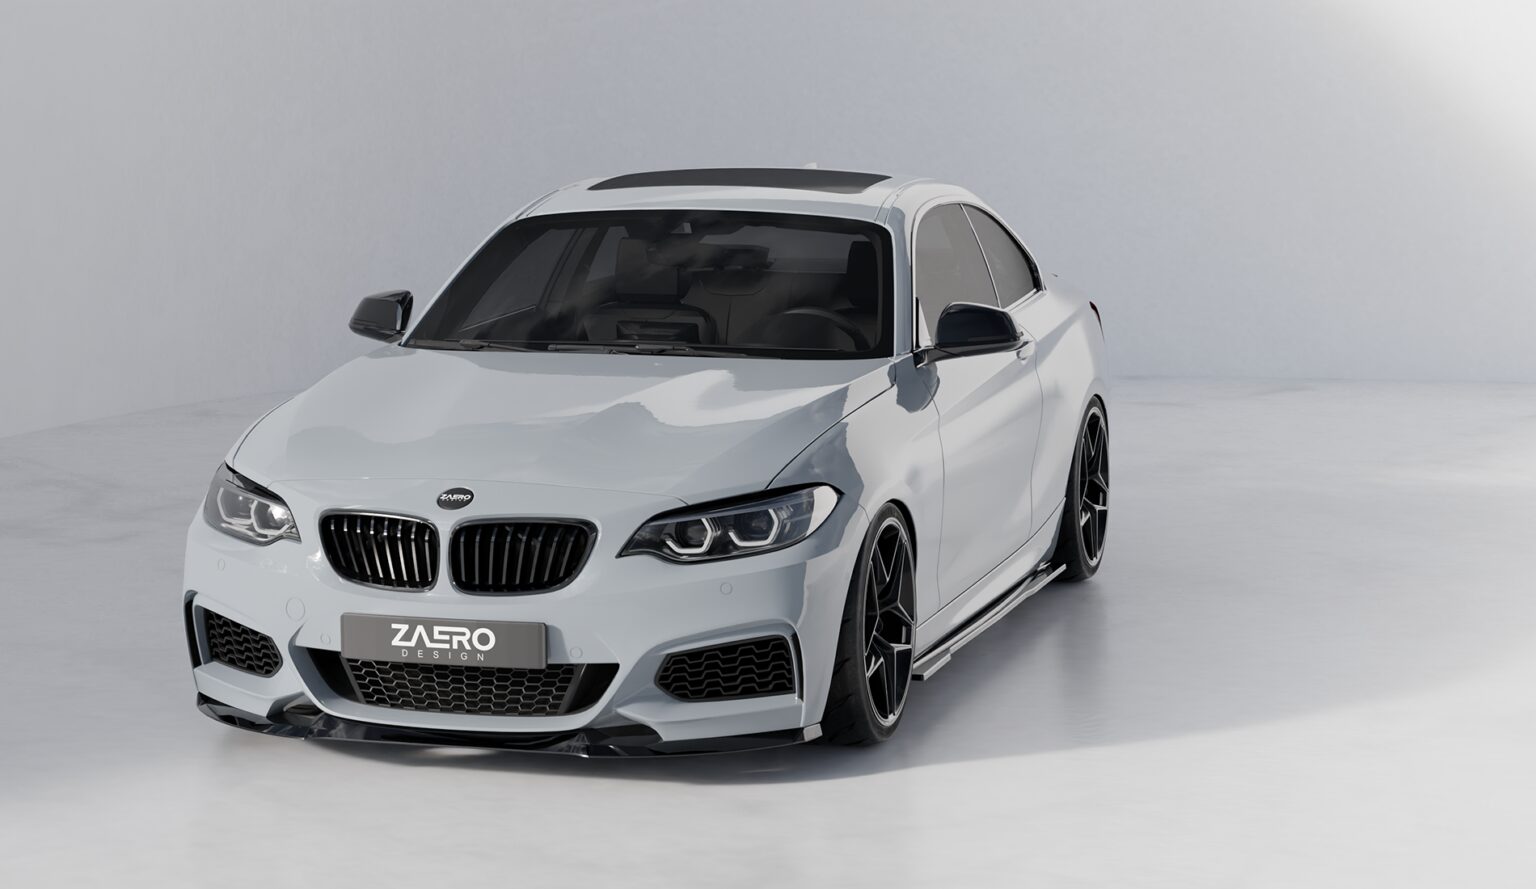 EVO-1 SIDE SKIRTS FOR BMW 2 SERIES F22 COUPE (218I TO M235 / M240)